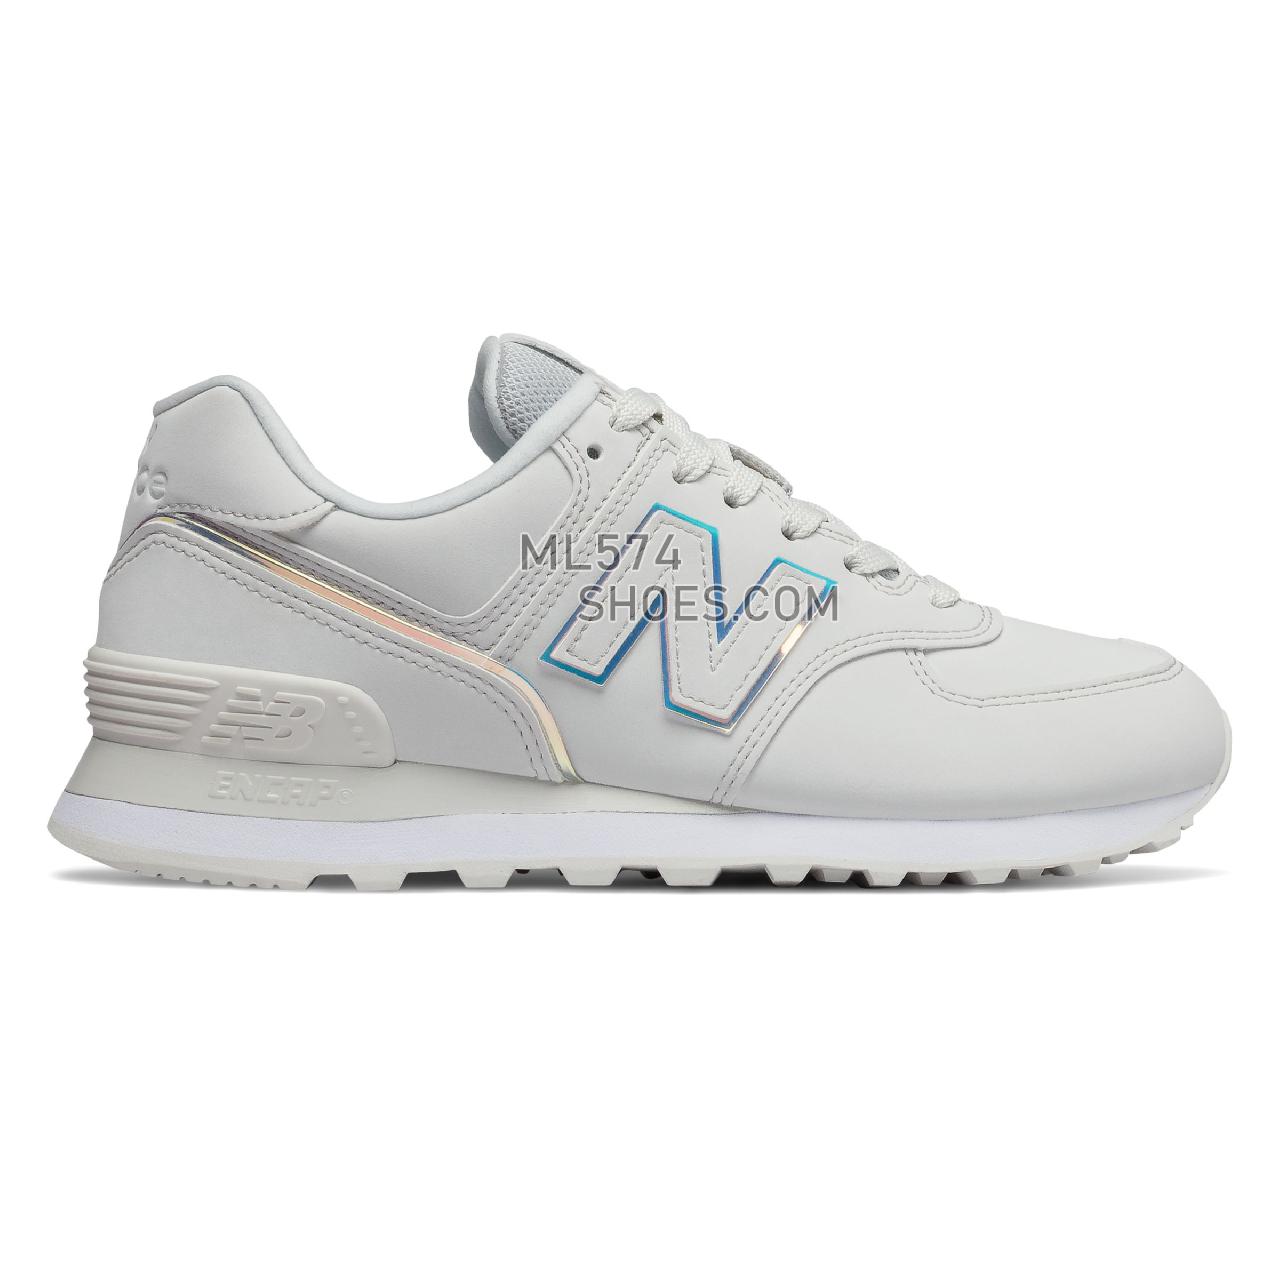 New Balance 574 - Women's Classic Sneakers - Nimbus Cloud with White - WL574CLD